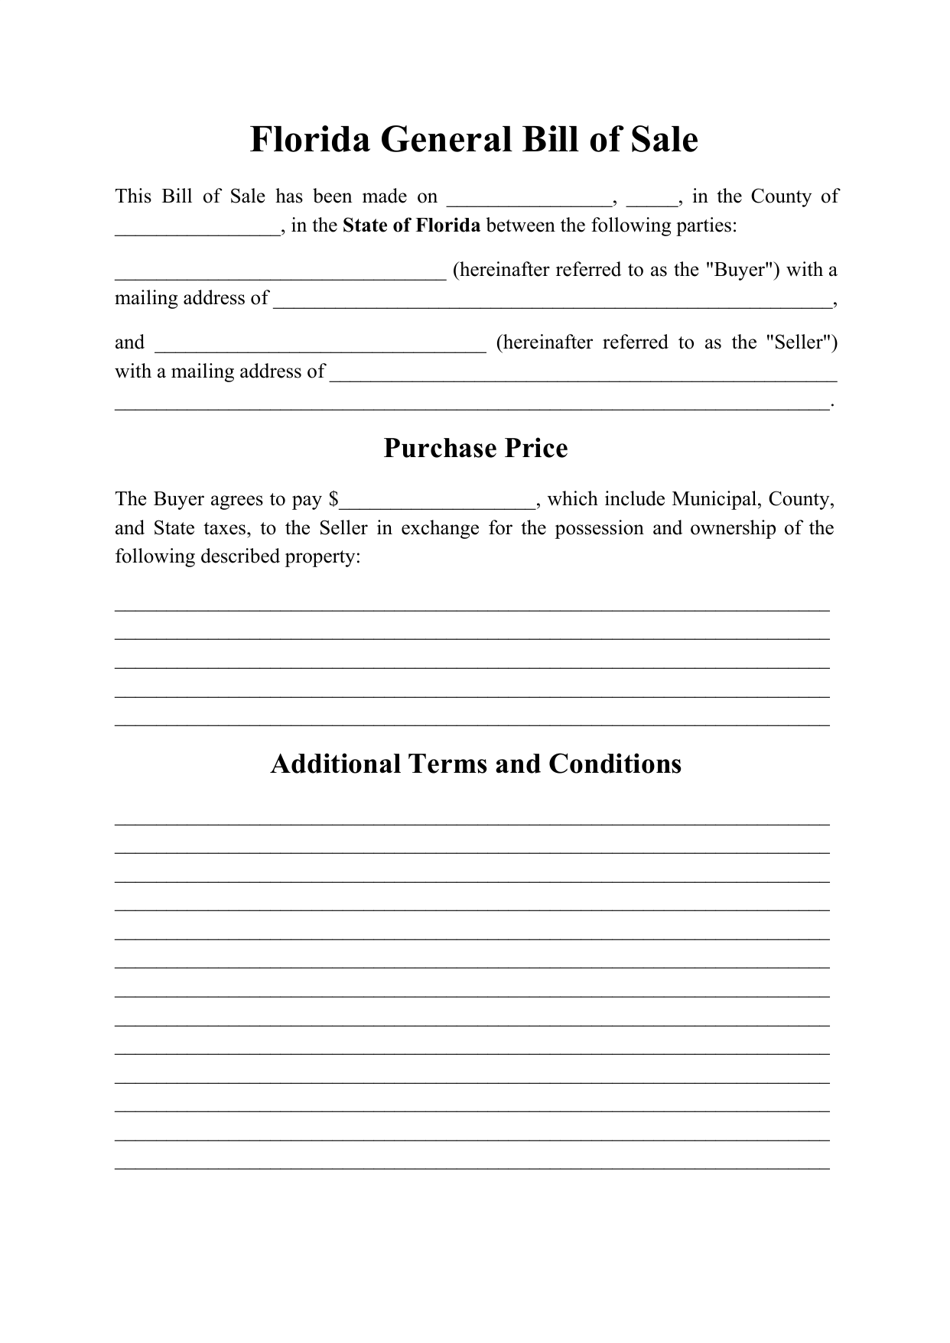 Generic Bill of Sale Form - Florida, Page 1